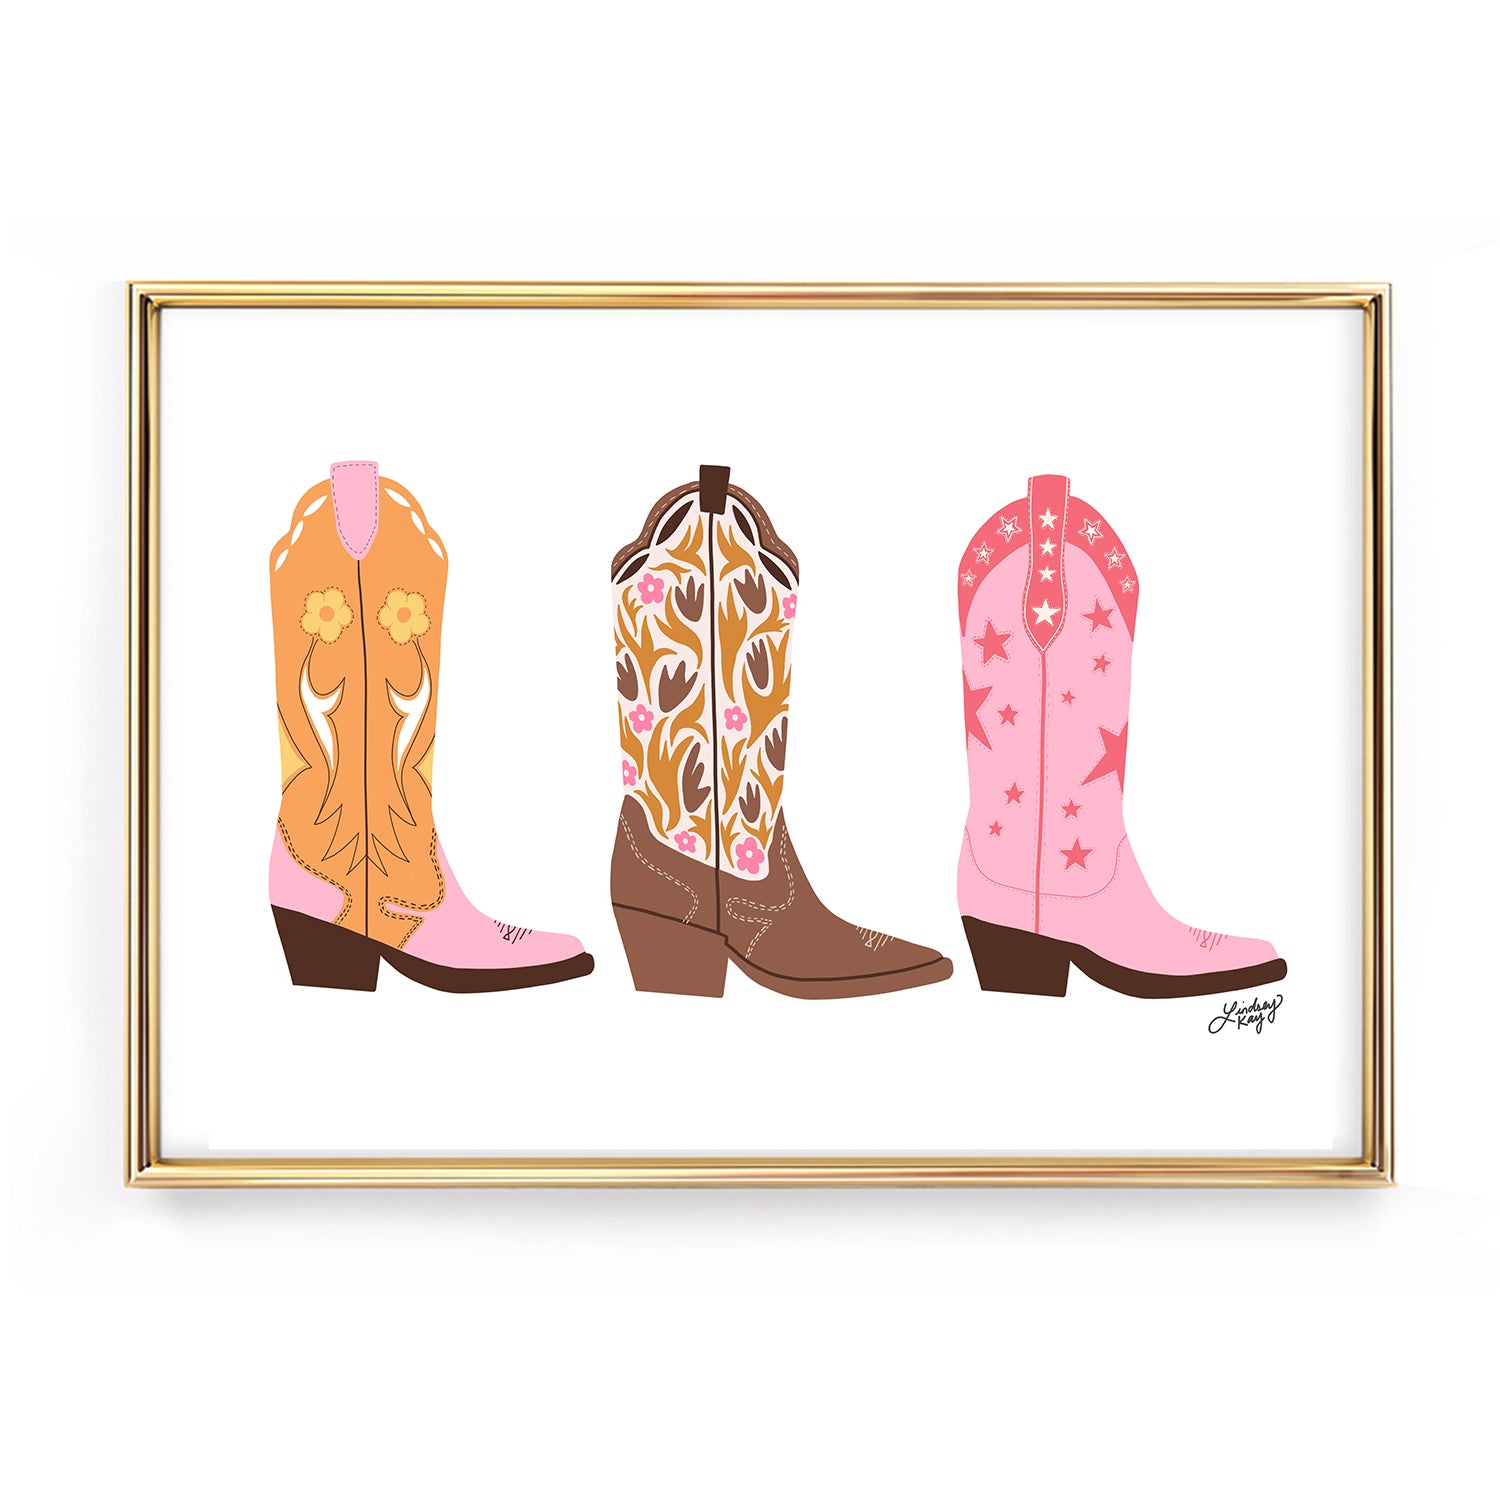 cowboy cowgirl boots pink yellow orange brown illustration art print poster wall art colorful decor artwork dorm room lindsey kay collective